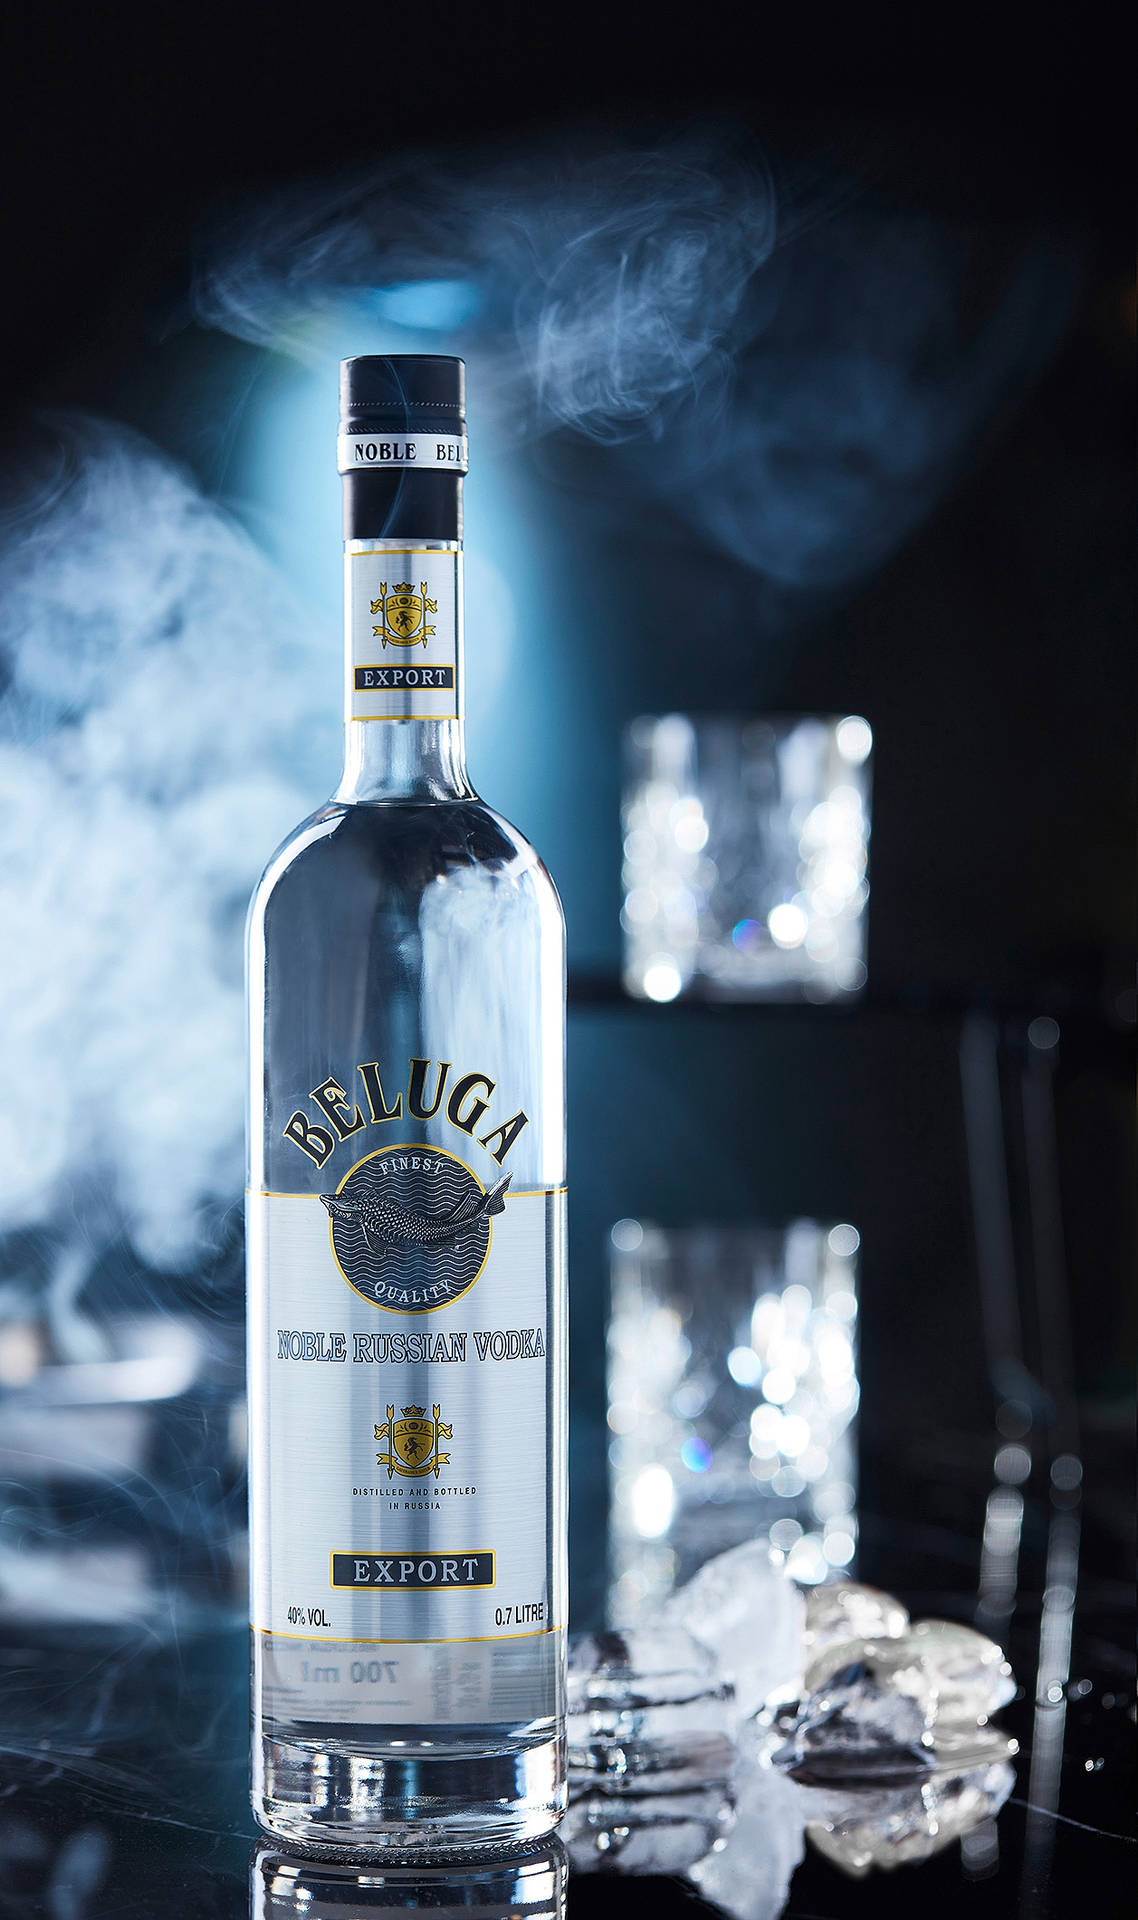 Beluga Noble Russian Vodka - Experience the Smoothness and Purity Wallpaper